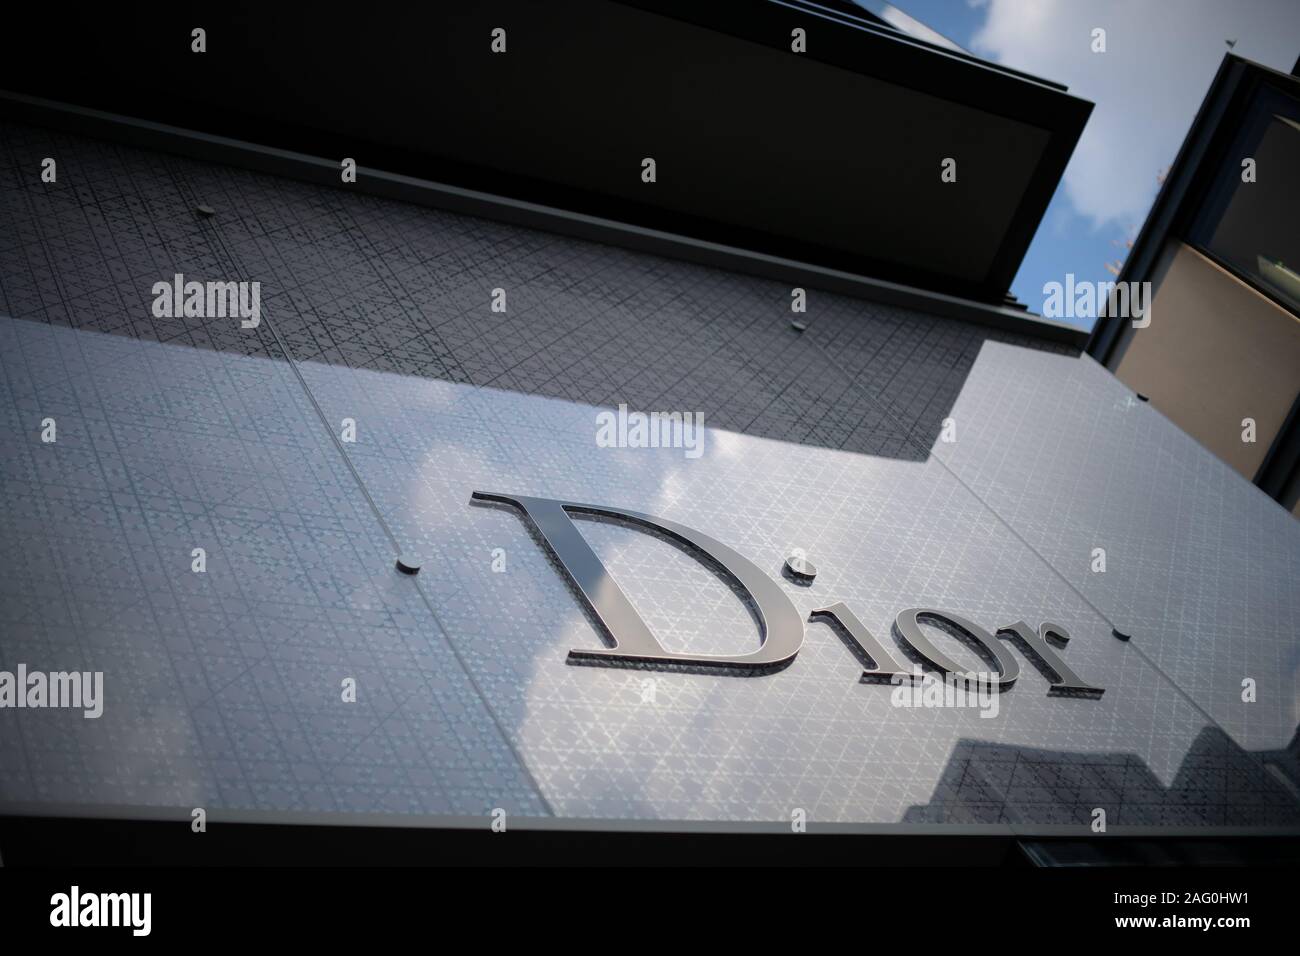 Close up of Dior brand logo – Stock Editorial Photo © lucidwaters #80443362